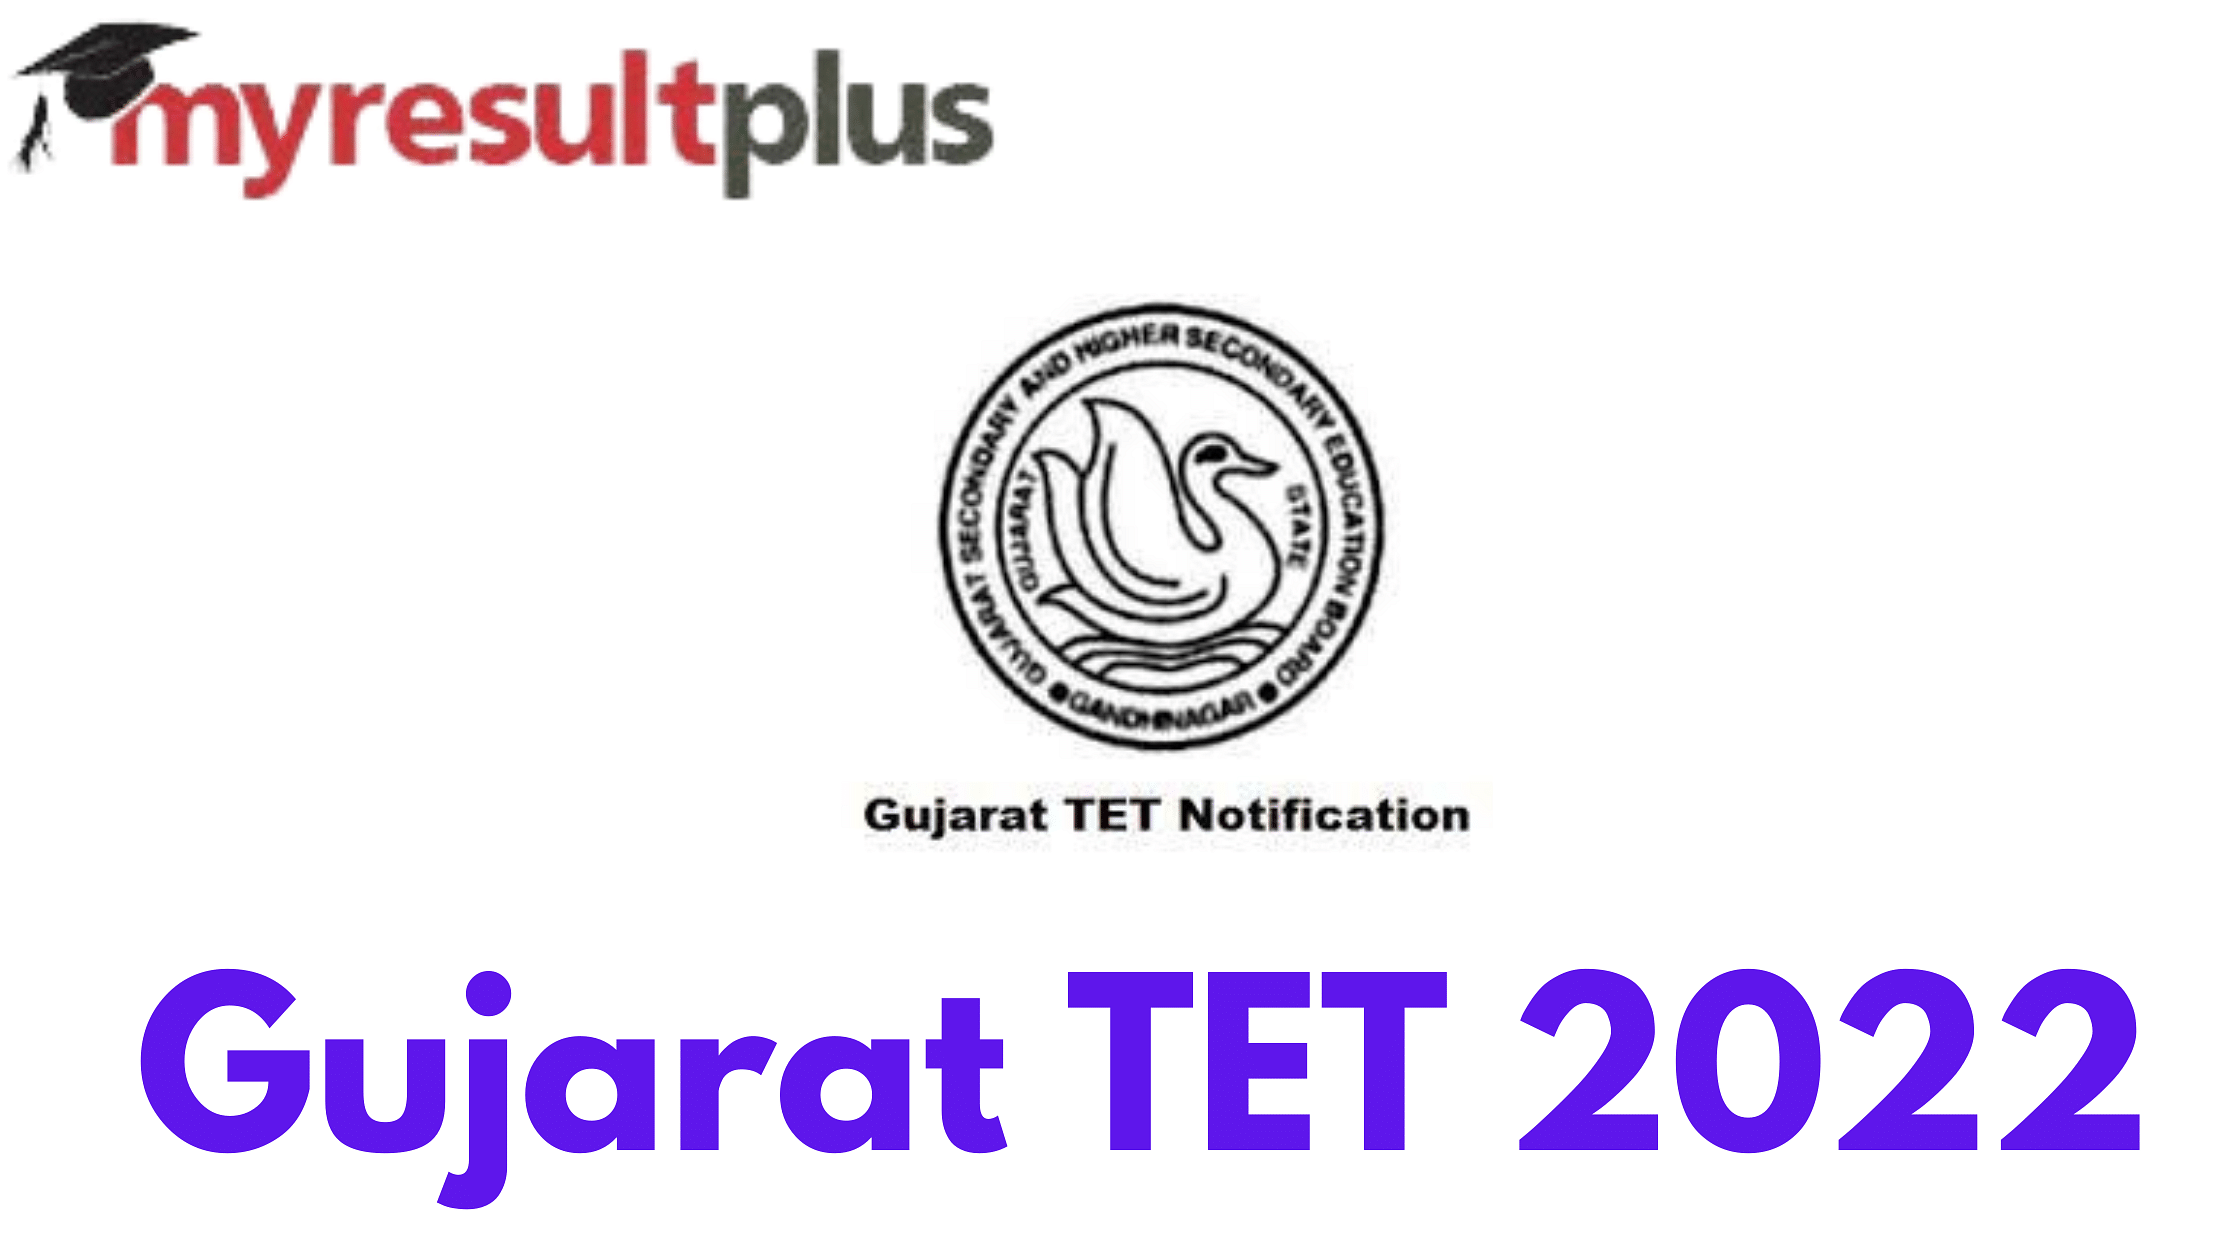 Gujarat TET 2022: Registration To Begin On This Date, Check Complete Details Here